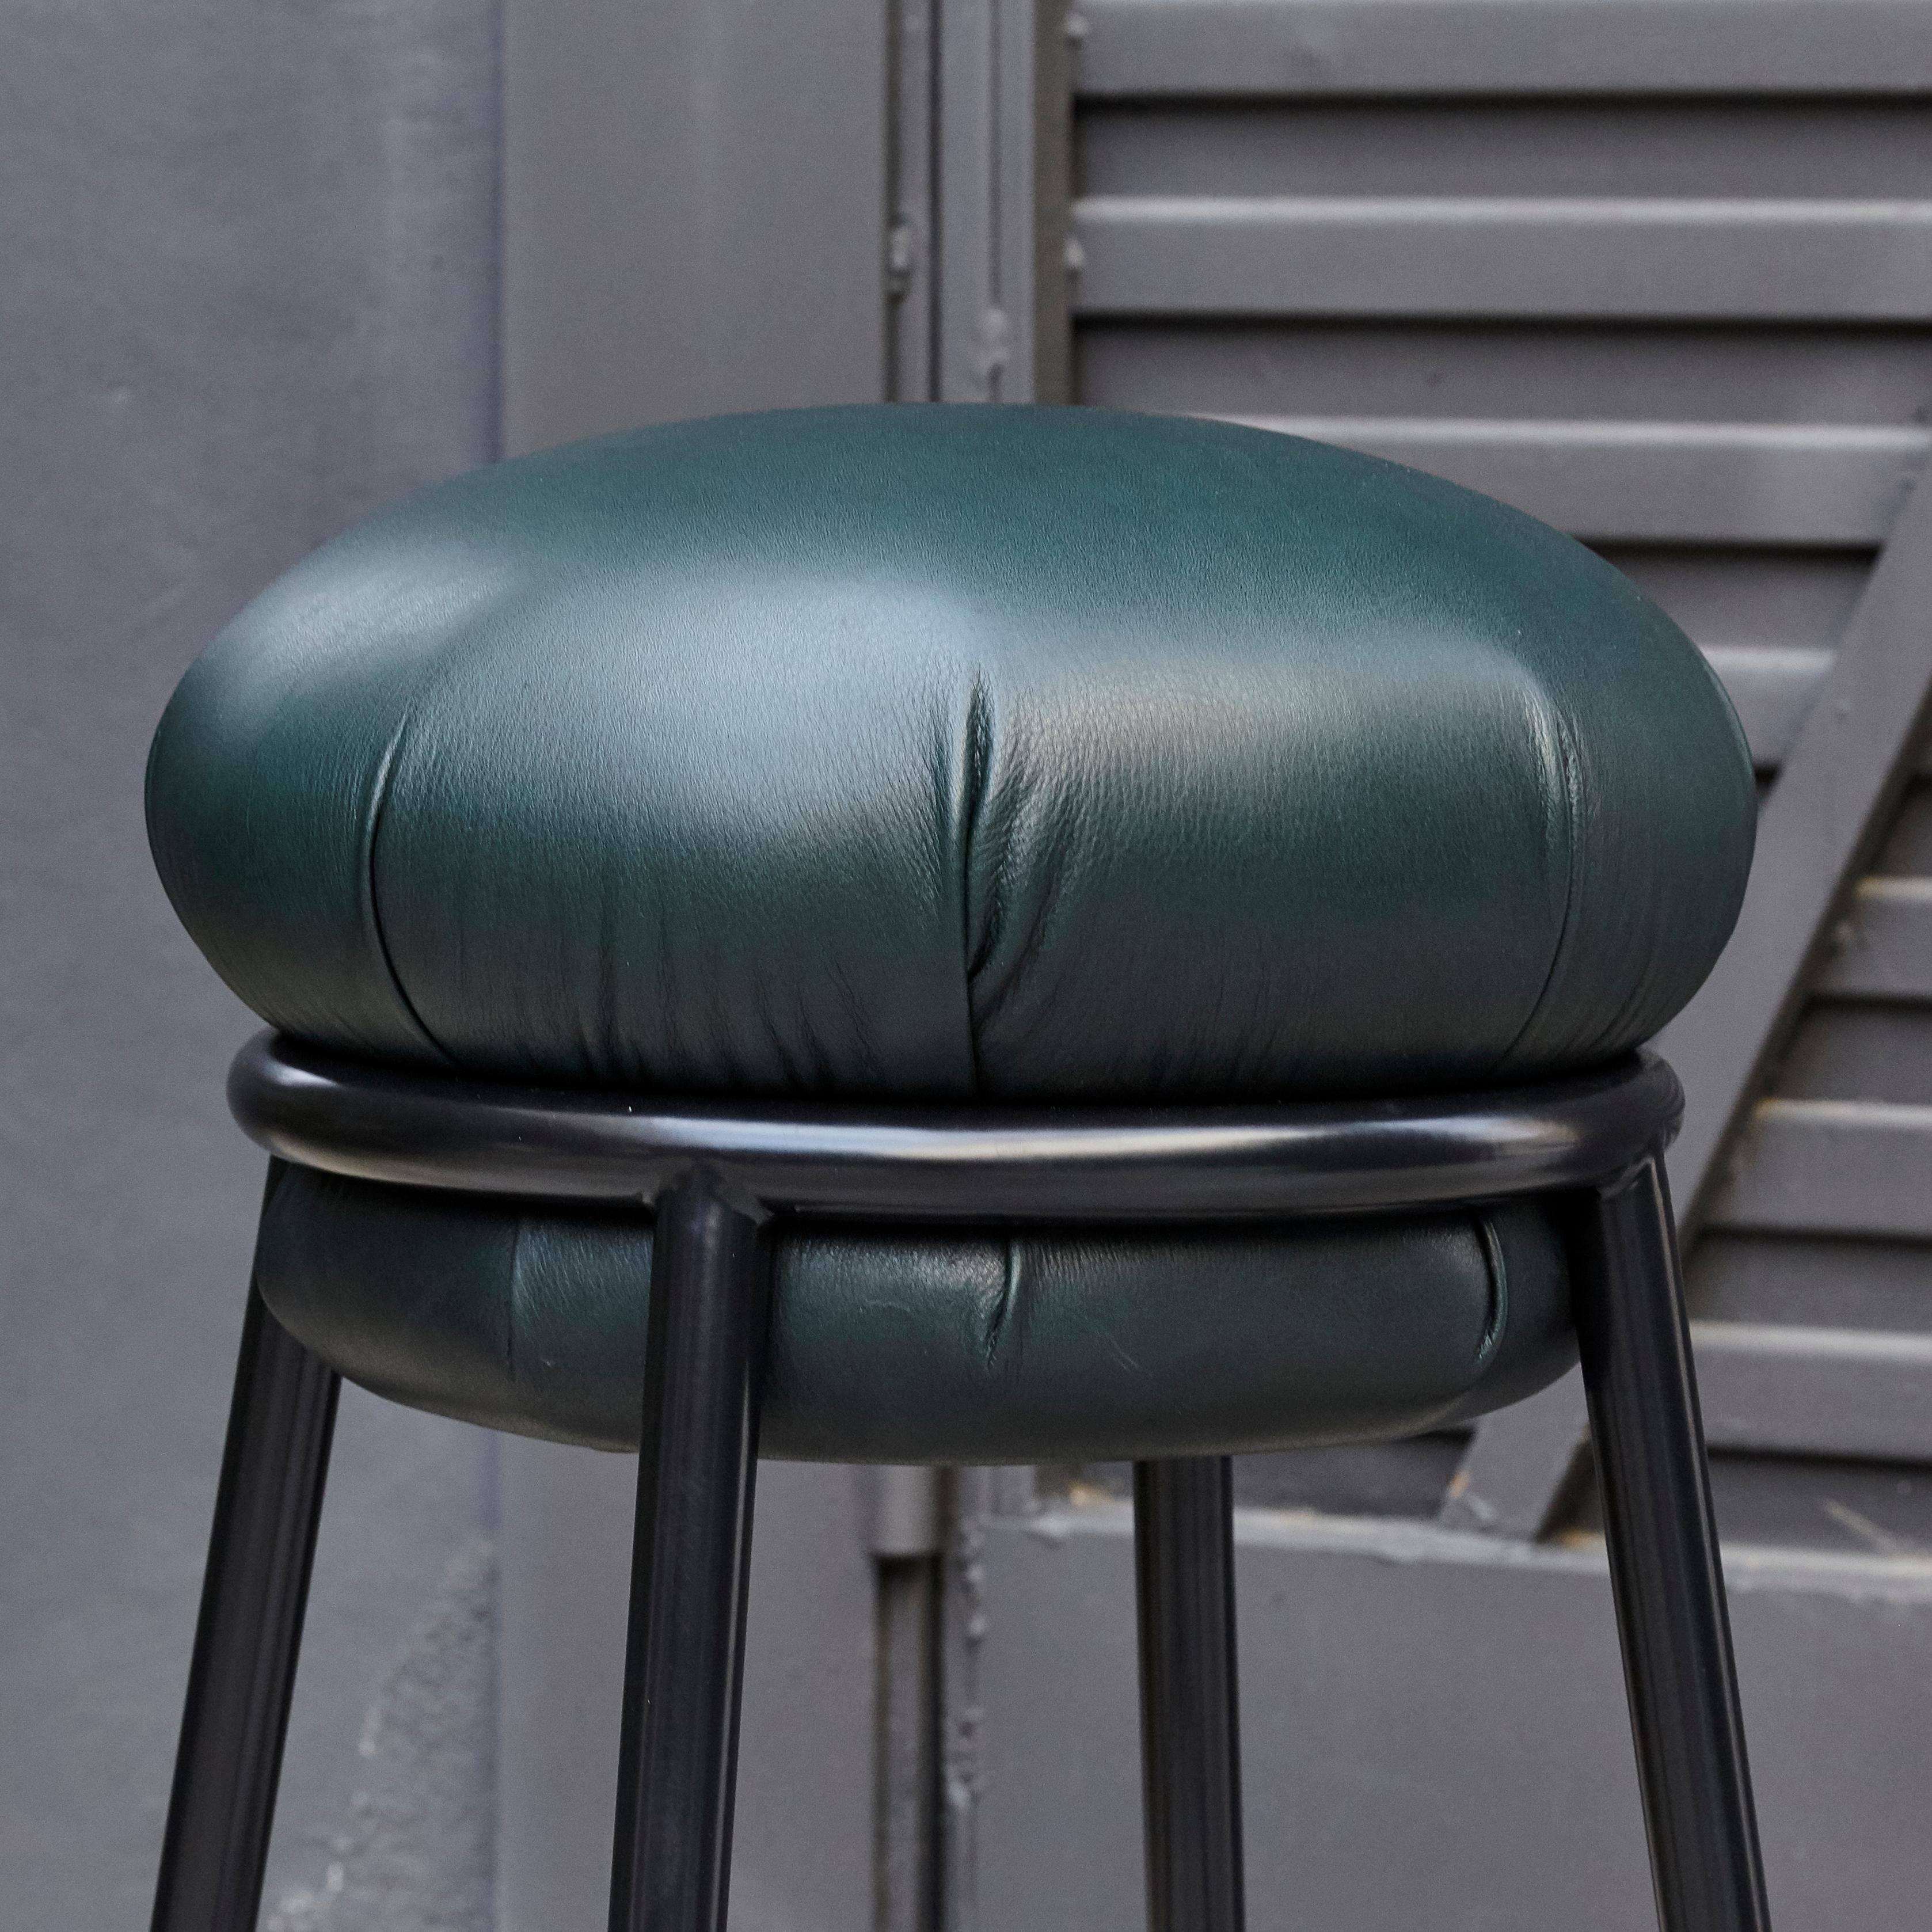 Spanish Stephen Burks Grasso Green Leather, Black Lacquered Metal Stool For Sale